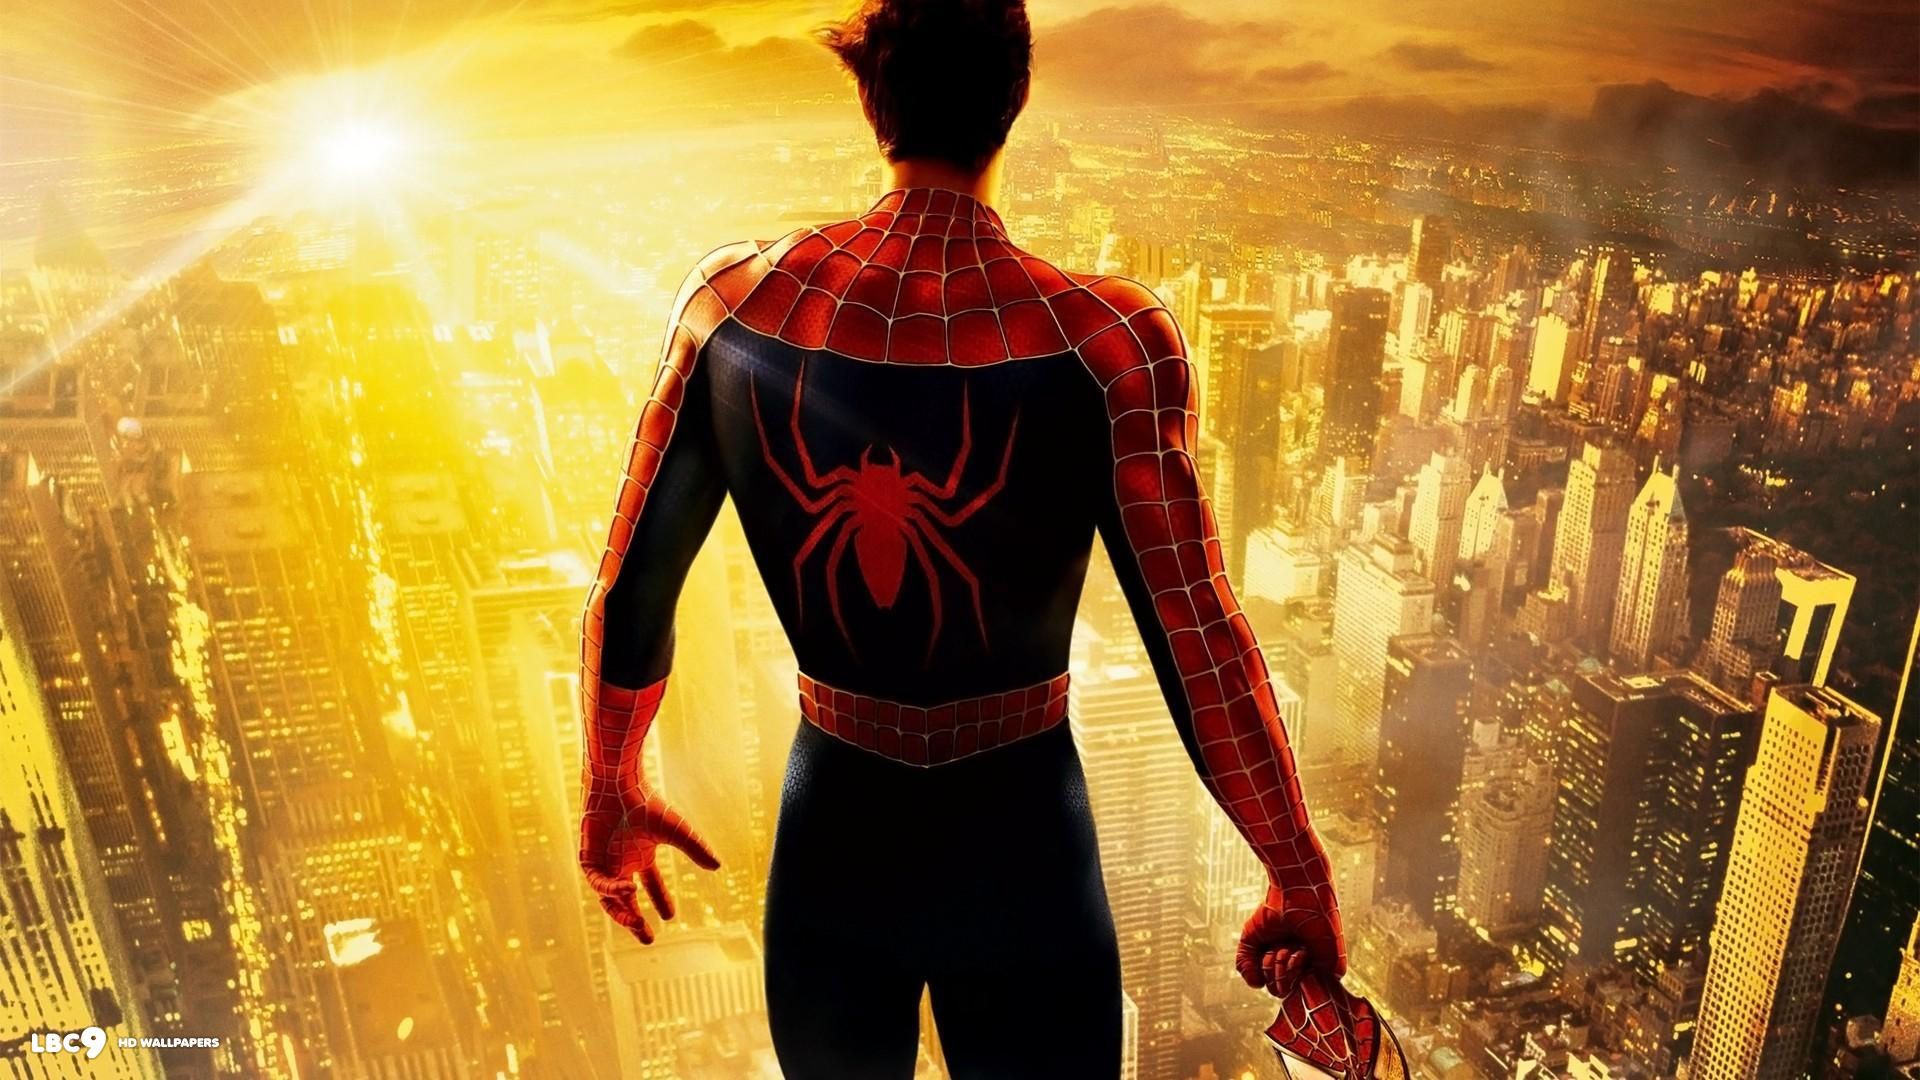 Spider man 2 wallpaper 4 / 5 movie hd backgrounds